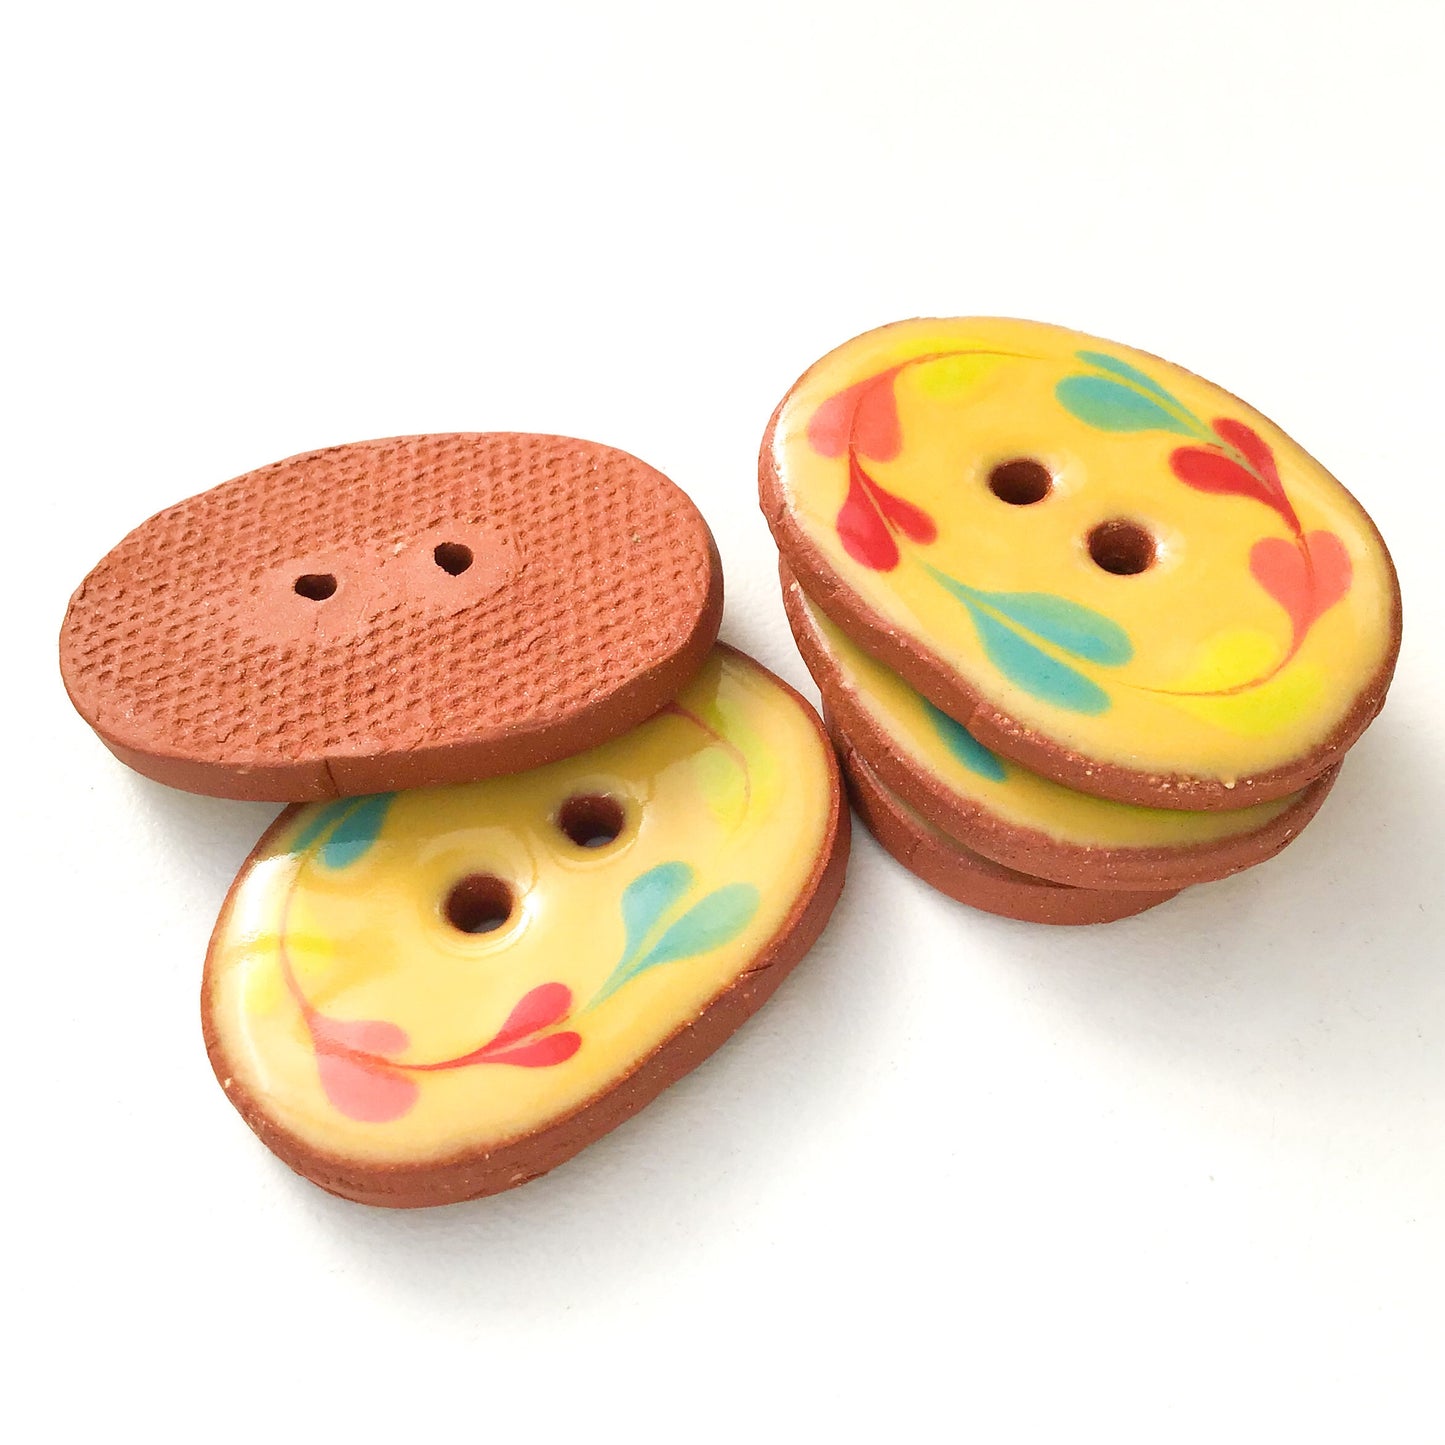 Yellow Ceramic Buttons with Rainbow Wreath - Oval Clay Buttons - 7/8" x 1 1/4"